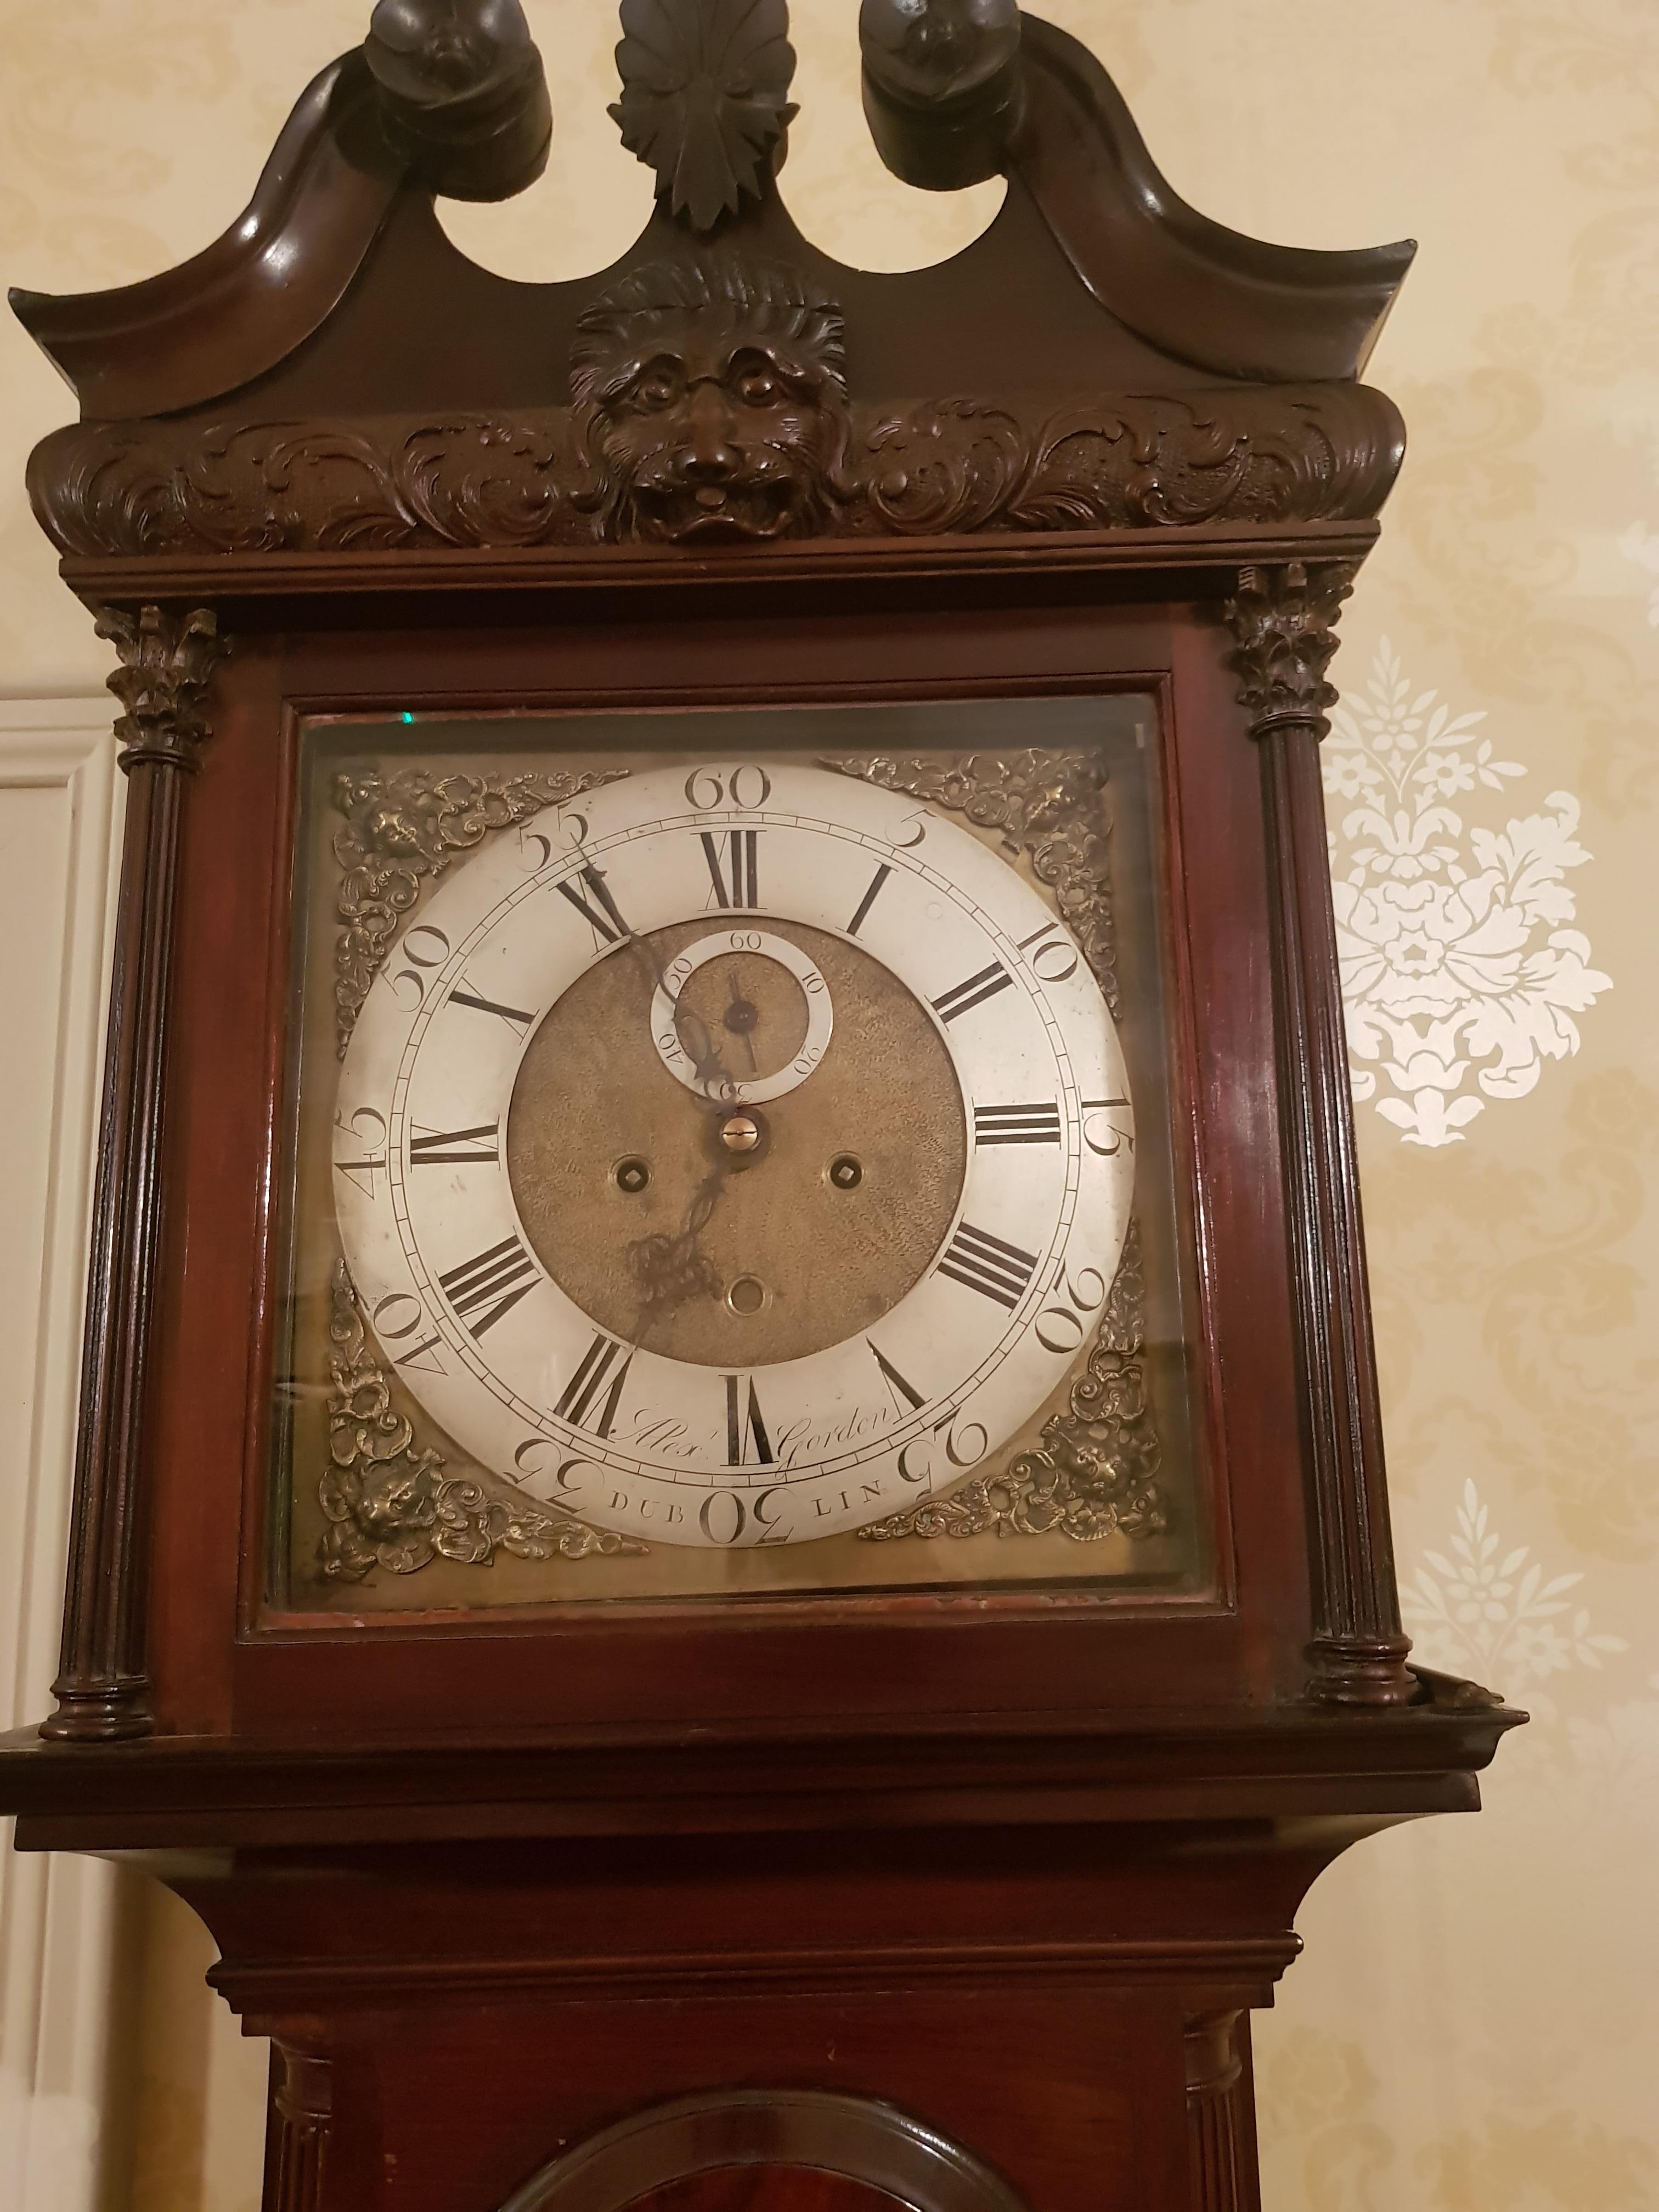 A fine Irish Chippendale clock of museum quality by this famous Dublin clock maker Alex Gordon. A similar clock by this maker stands in the halls of Castle Coole, Enniskillen, Co. Fermanagh and is illustrated in The Knight of Glins publishing's of